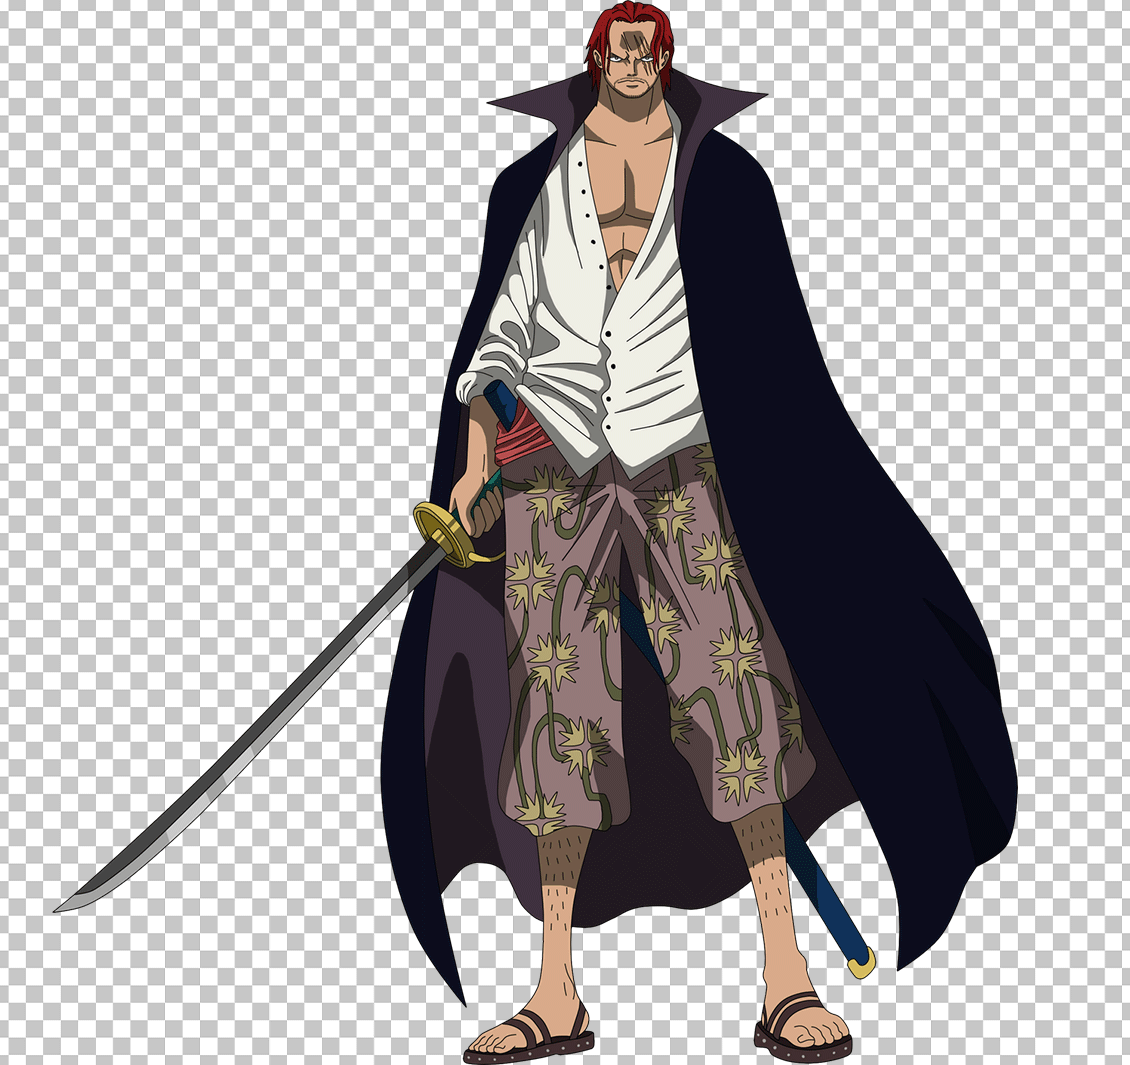 Shanks standing in angry looks PNG Image